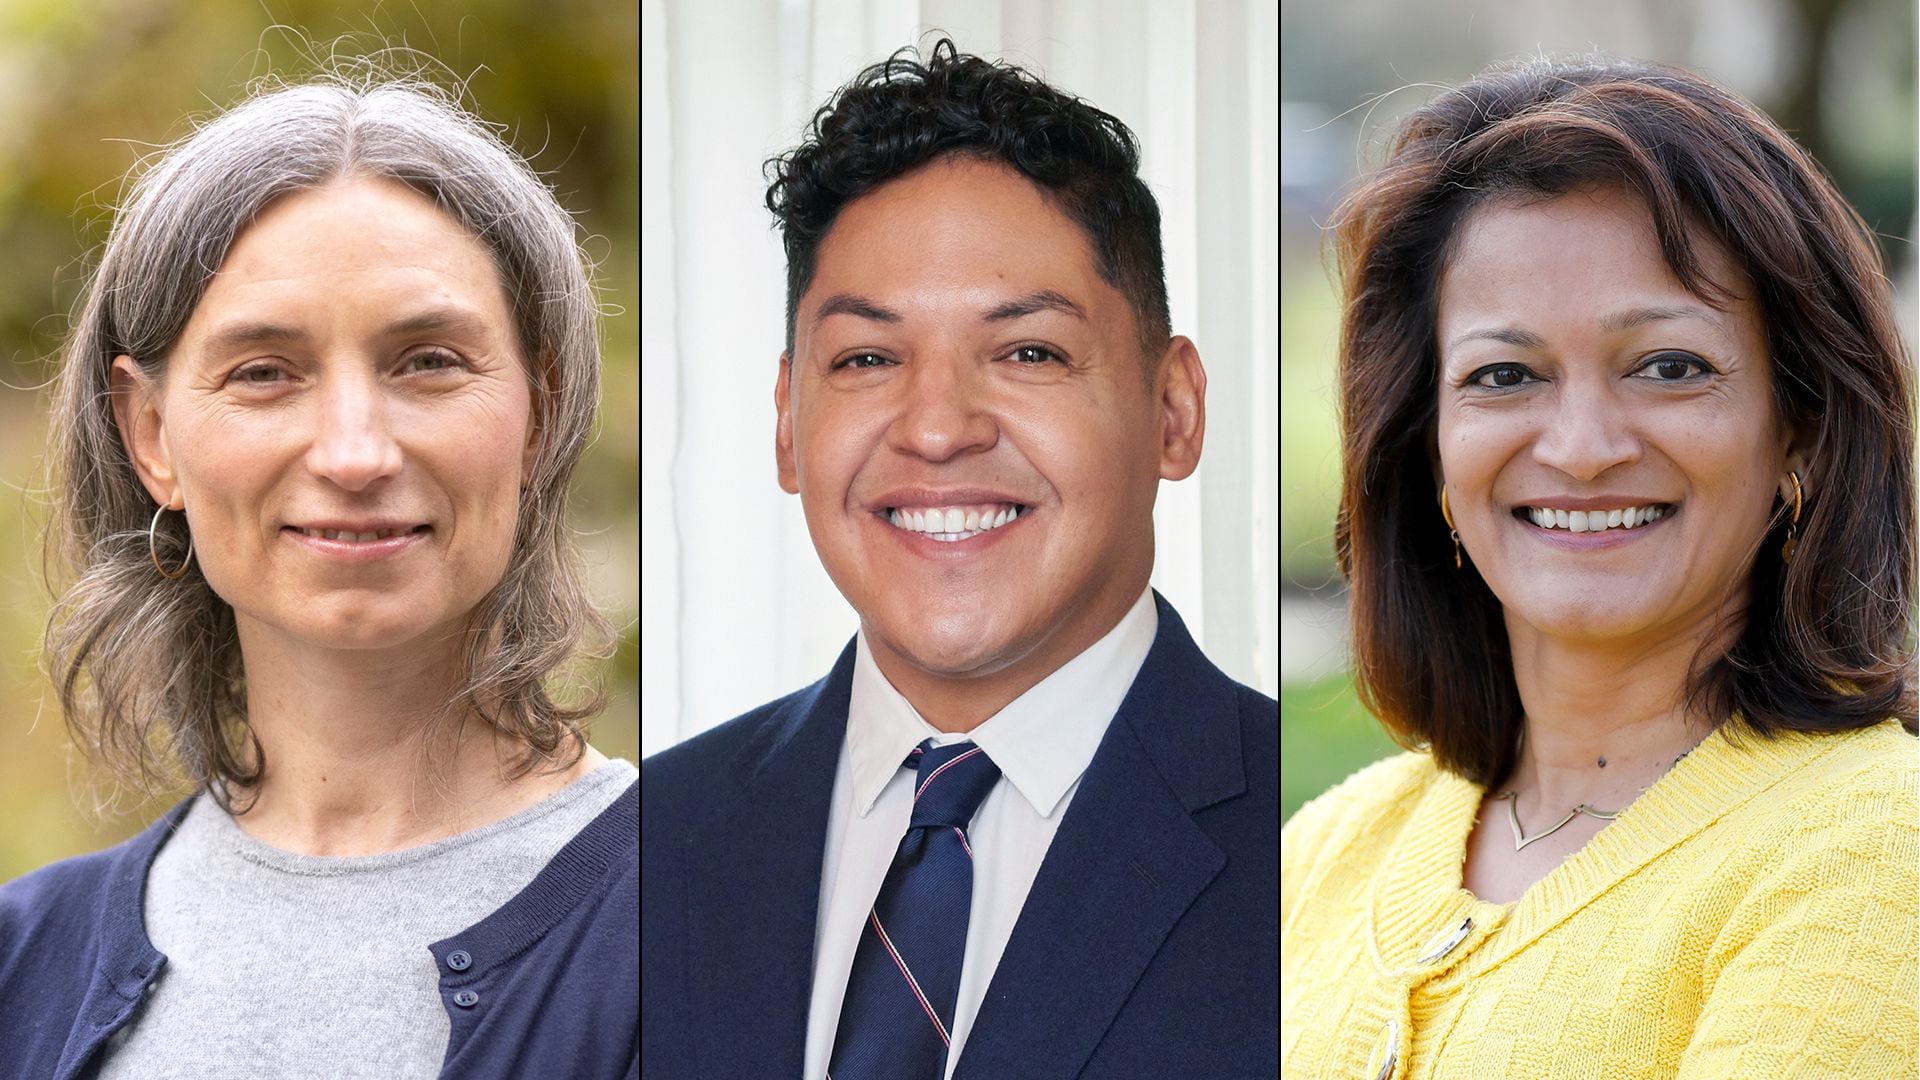 (Left to right) Democratic Party primary candidates for Oregon’s 3rd Congressional District, Maxine Dexter, Eddy Morales, and Susheela Jayapal.